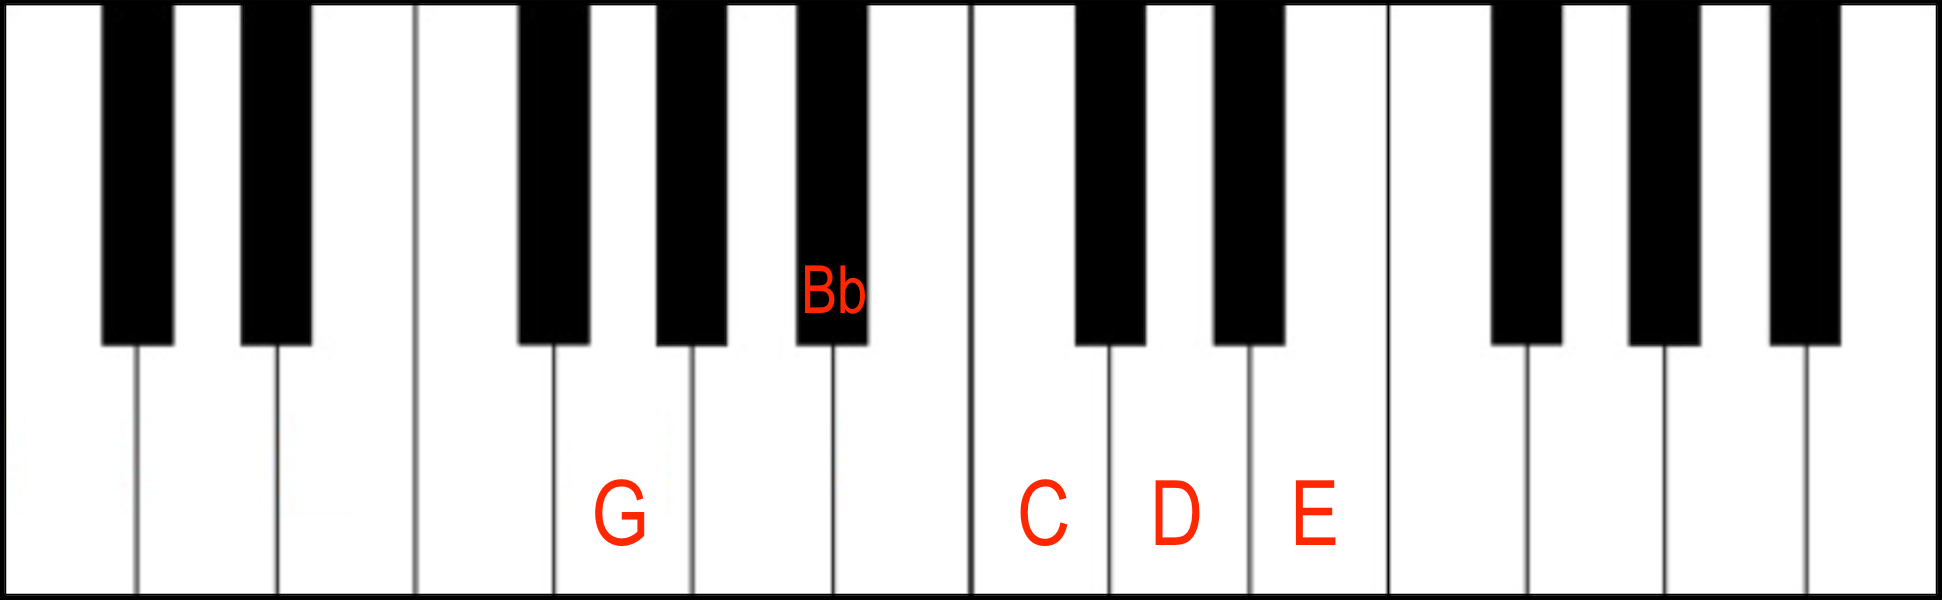 C9 Chord in 2nd Inversion